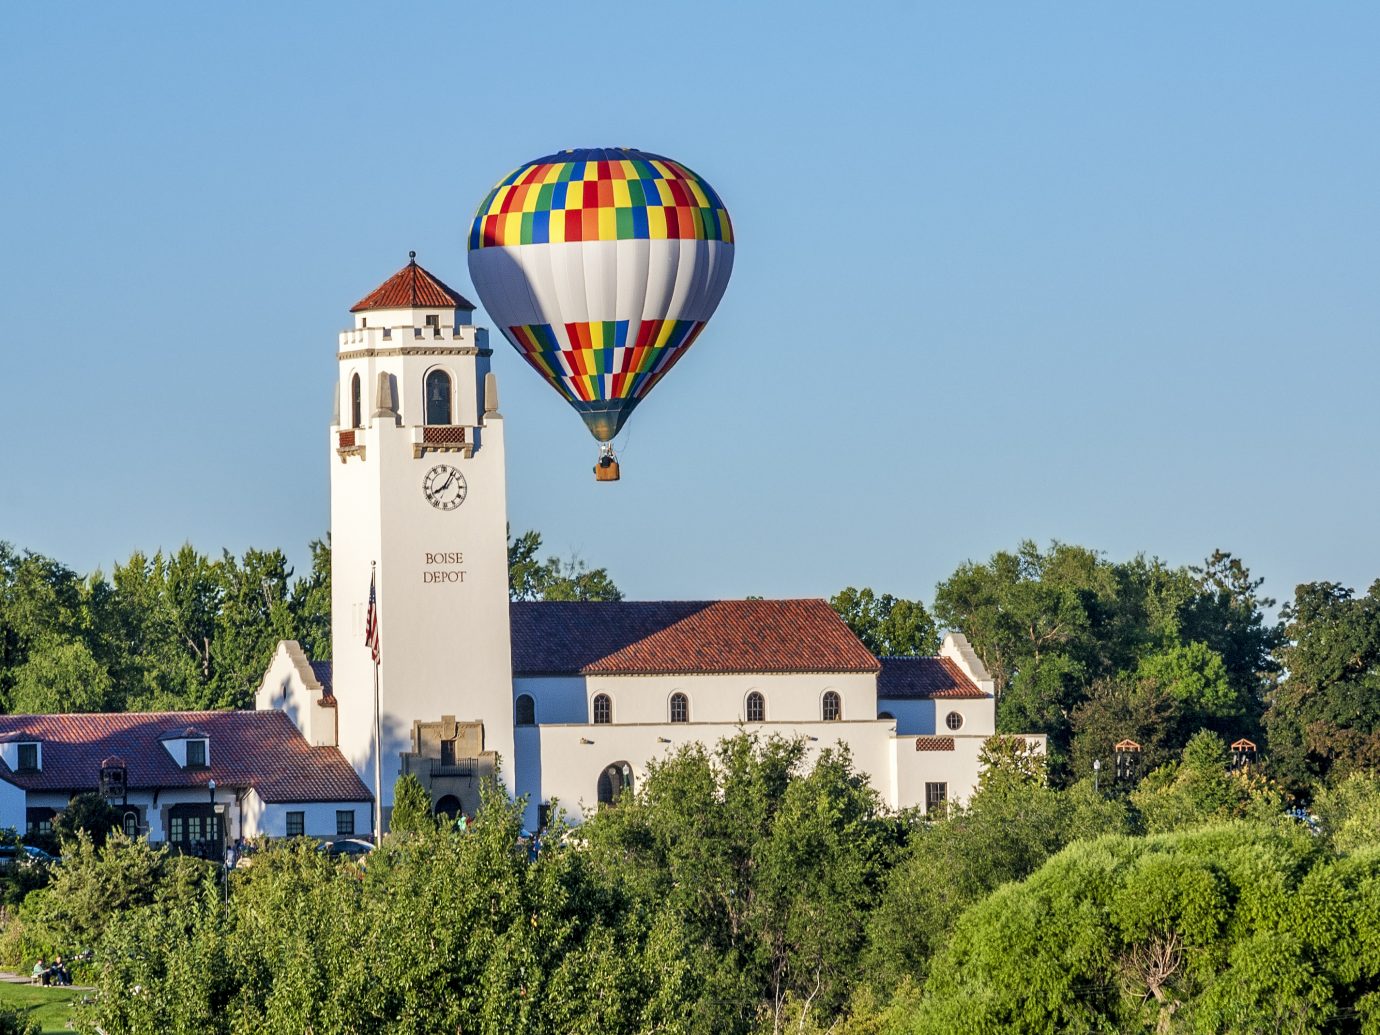 City park at the Boise depot and balloon